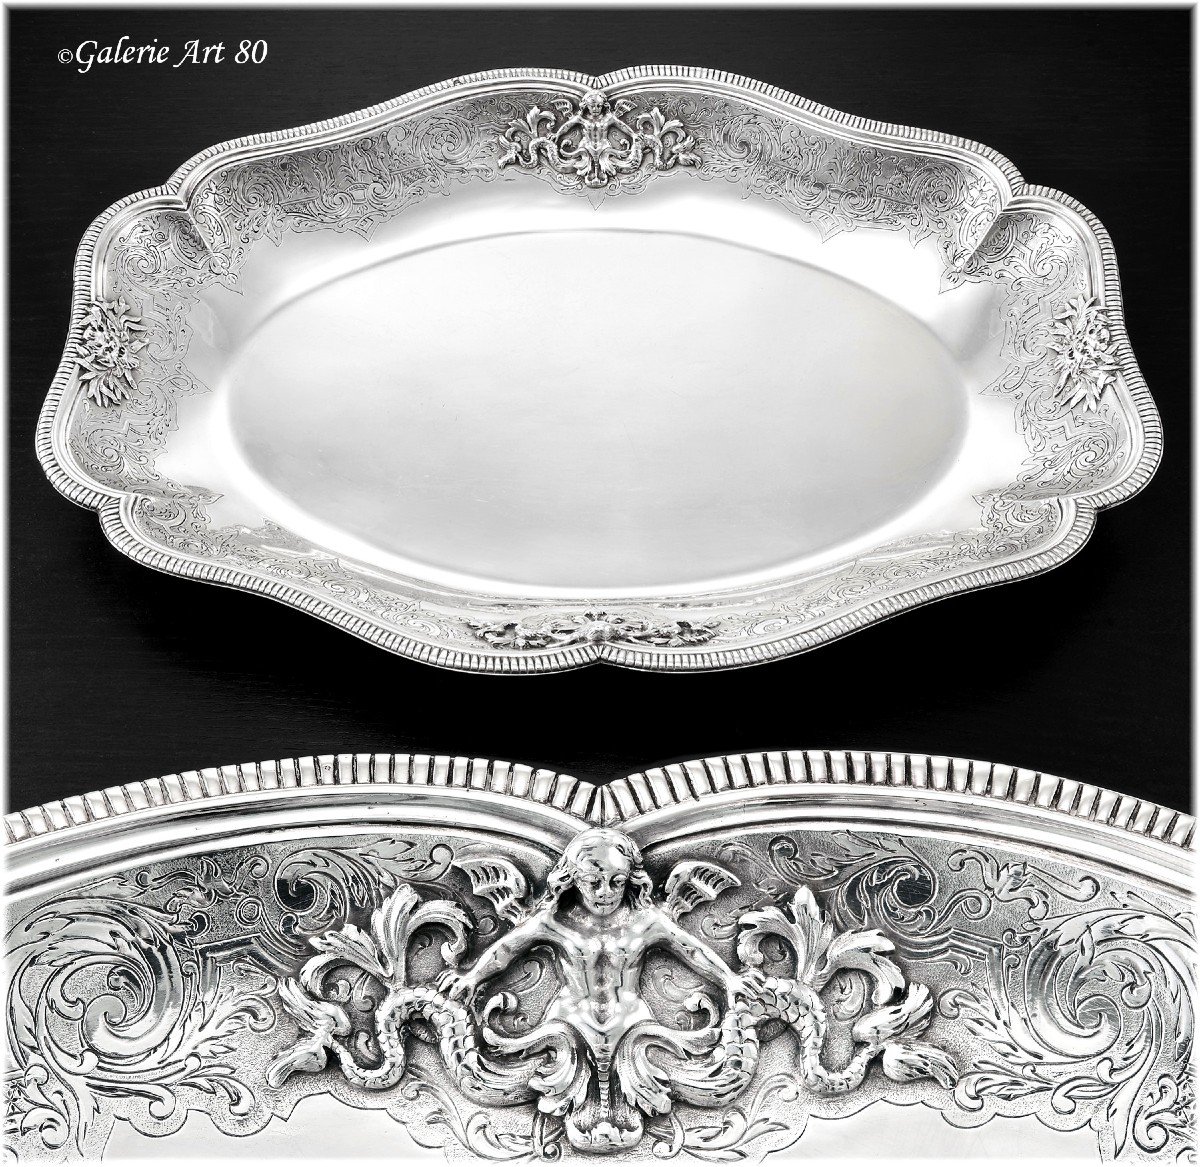 Tiffany :  Antique Sterling Silver Regency Style Centerpiece - Hollow Dish Fauns & Melusina Decor